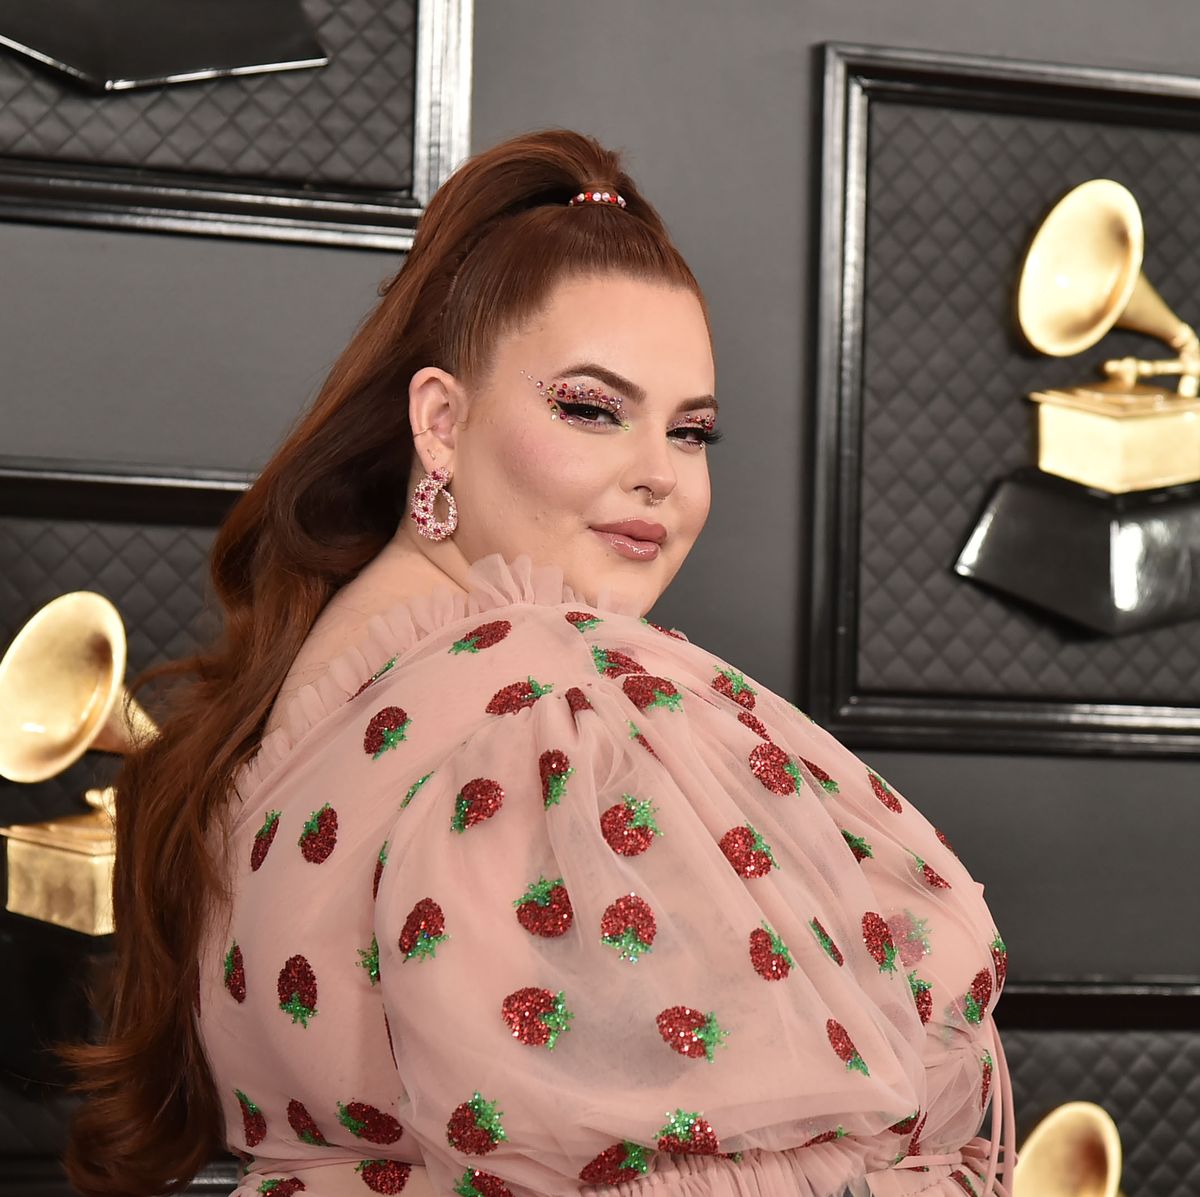 Plus-size model Tess Holliday opens up about eating disorder